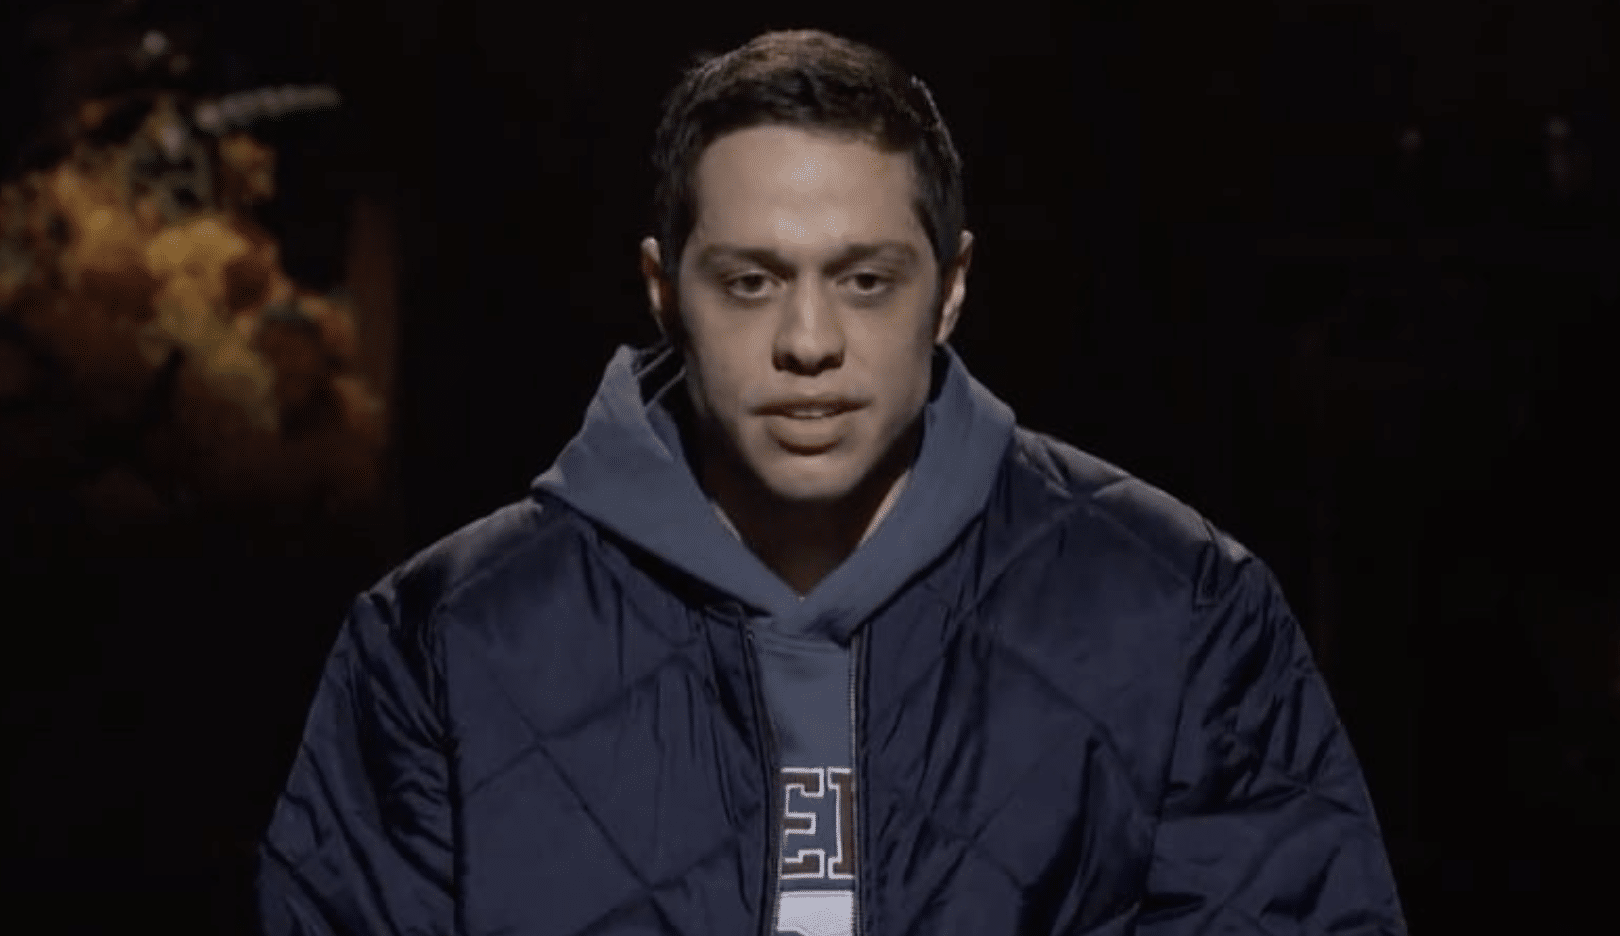 Pete Davidson Hosts SNL "Comedy is the only way through tragedy"